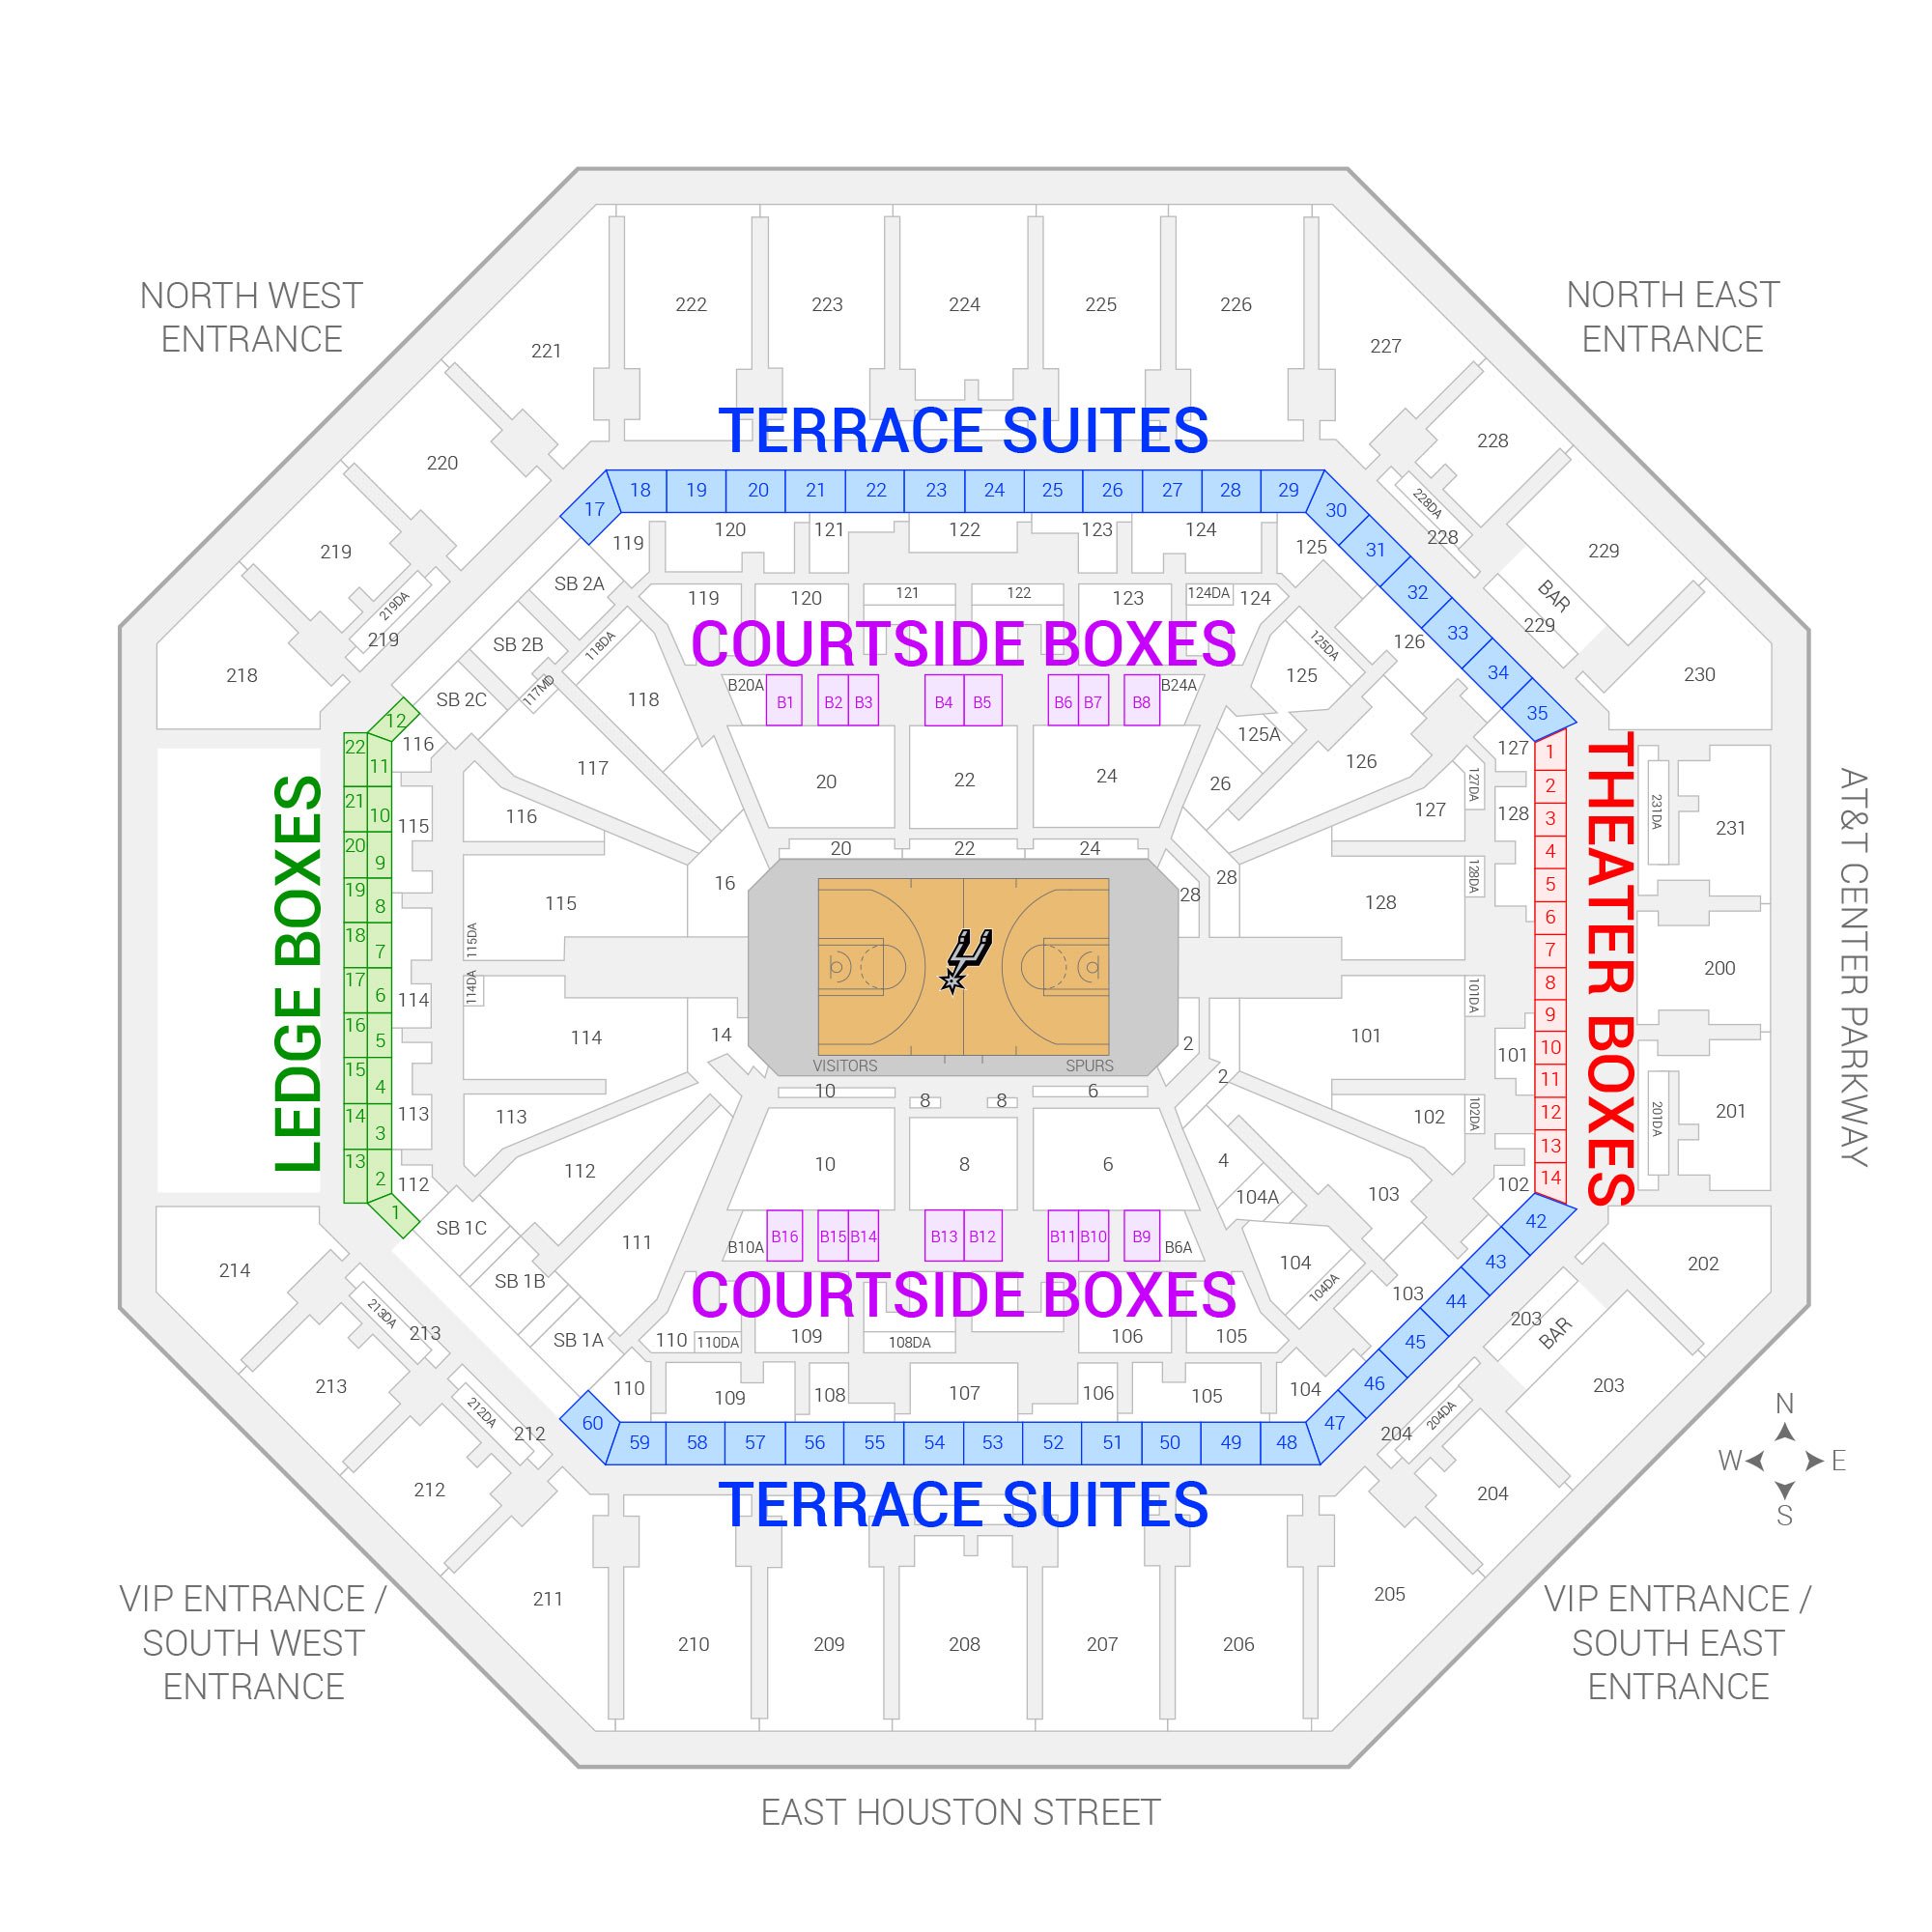 Frost Bank Center (Formerly AT&T Center) / San Antonio Spurs Suite Map and Seating Chart